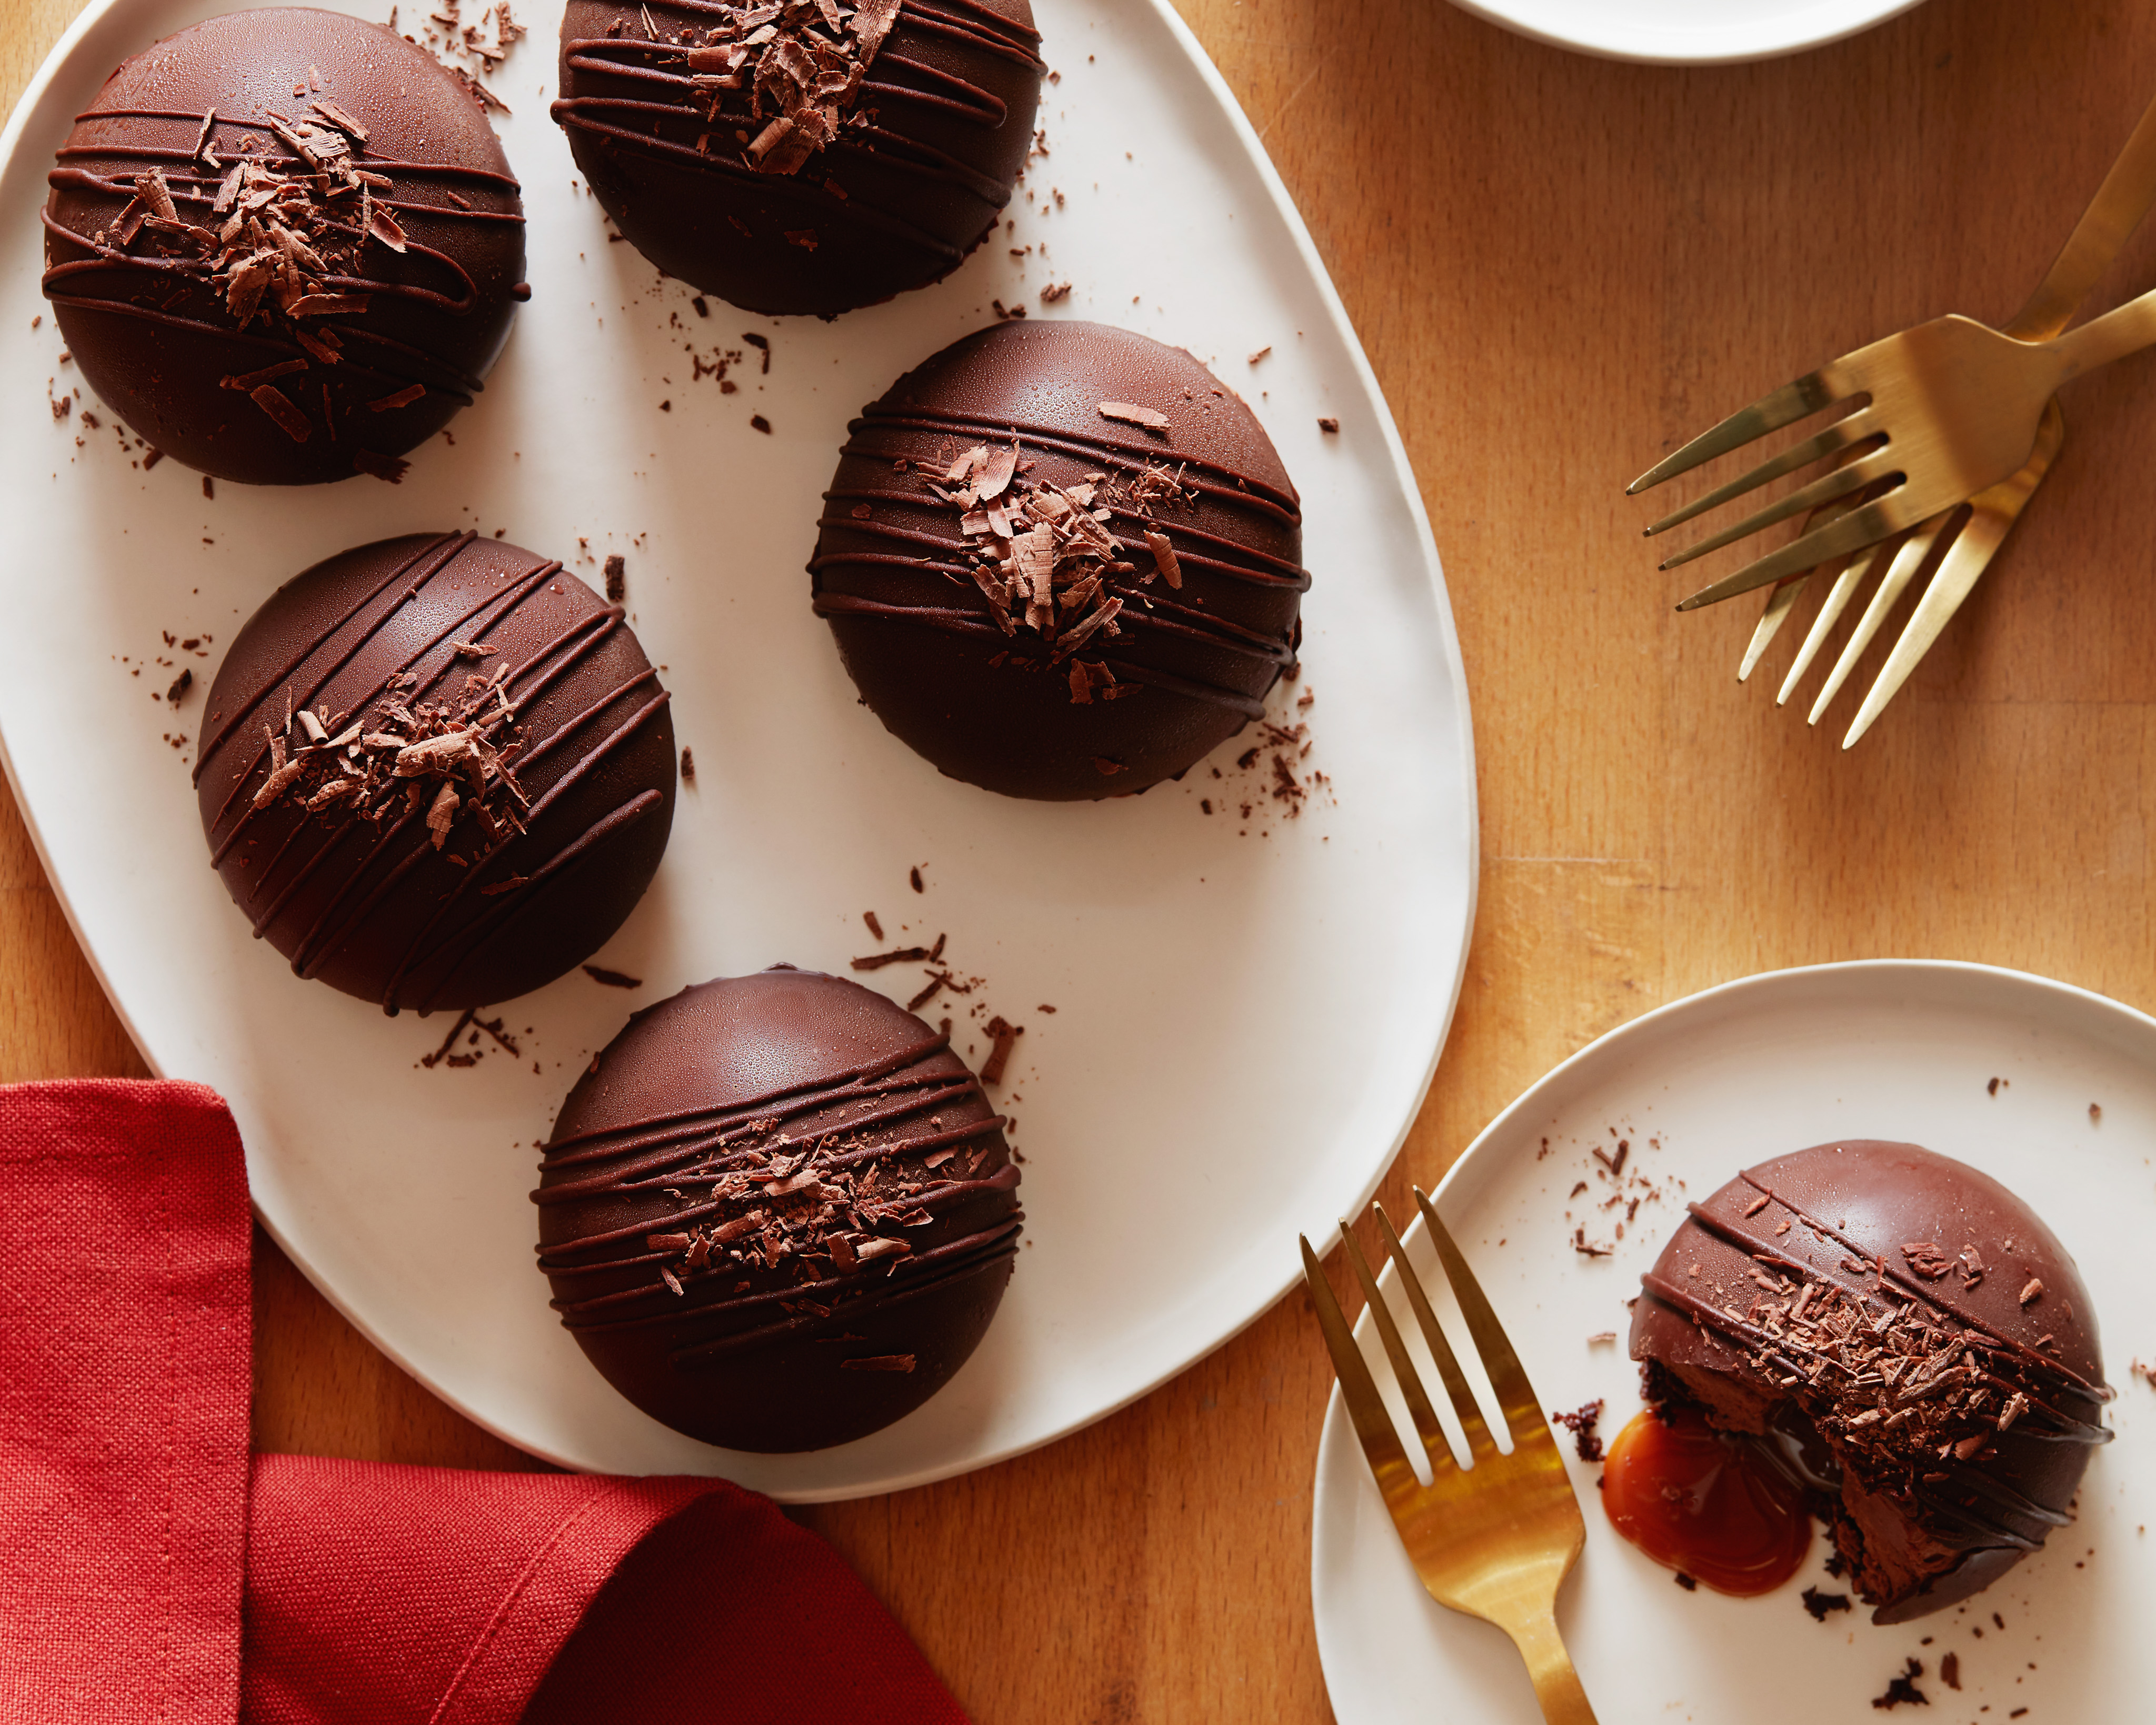 https://www.foodnetwork.com/content/dam/images/food/fullset/2018/7/30/0/FN_CHOCOLATE-CARAMEL-DOMES-OVERHEAD-SOLO-H_s4x3.jpg